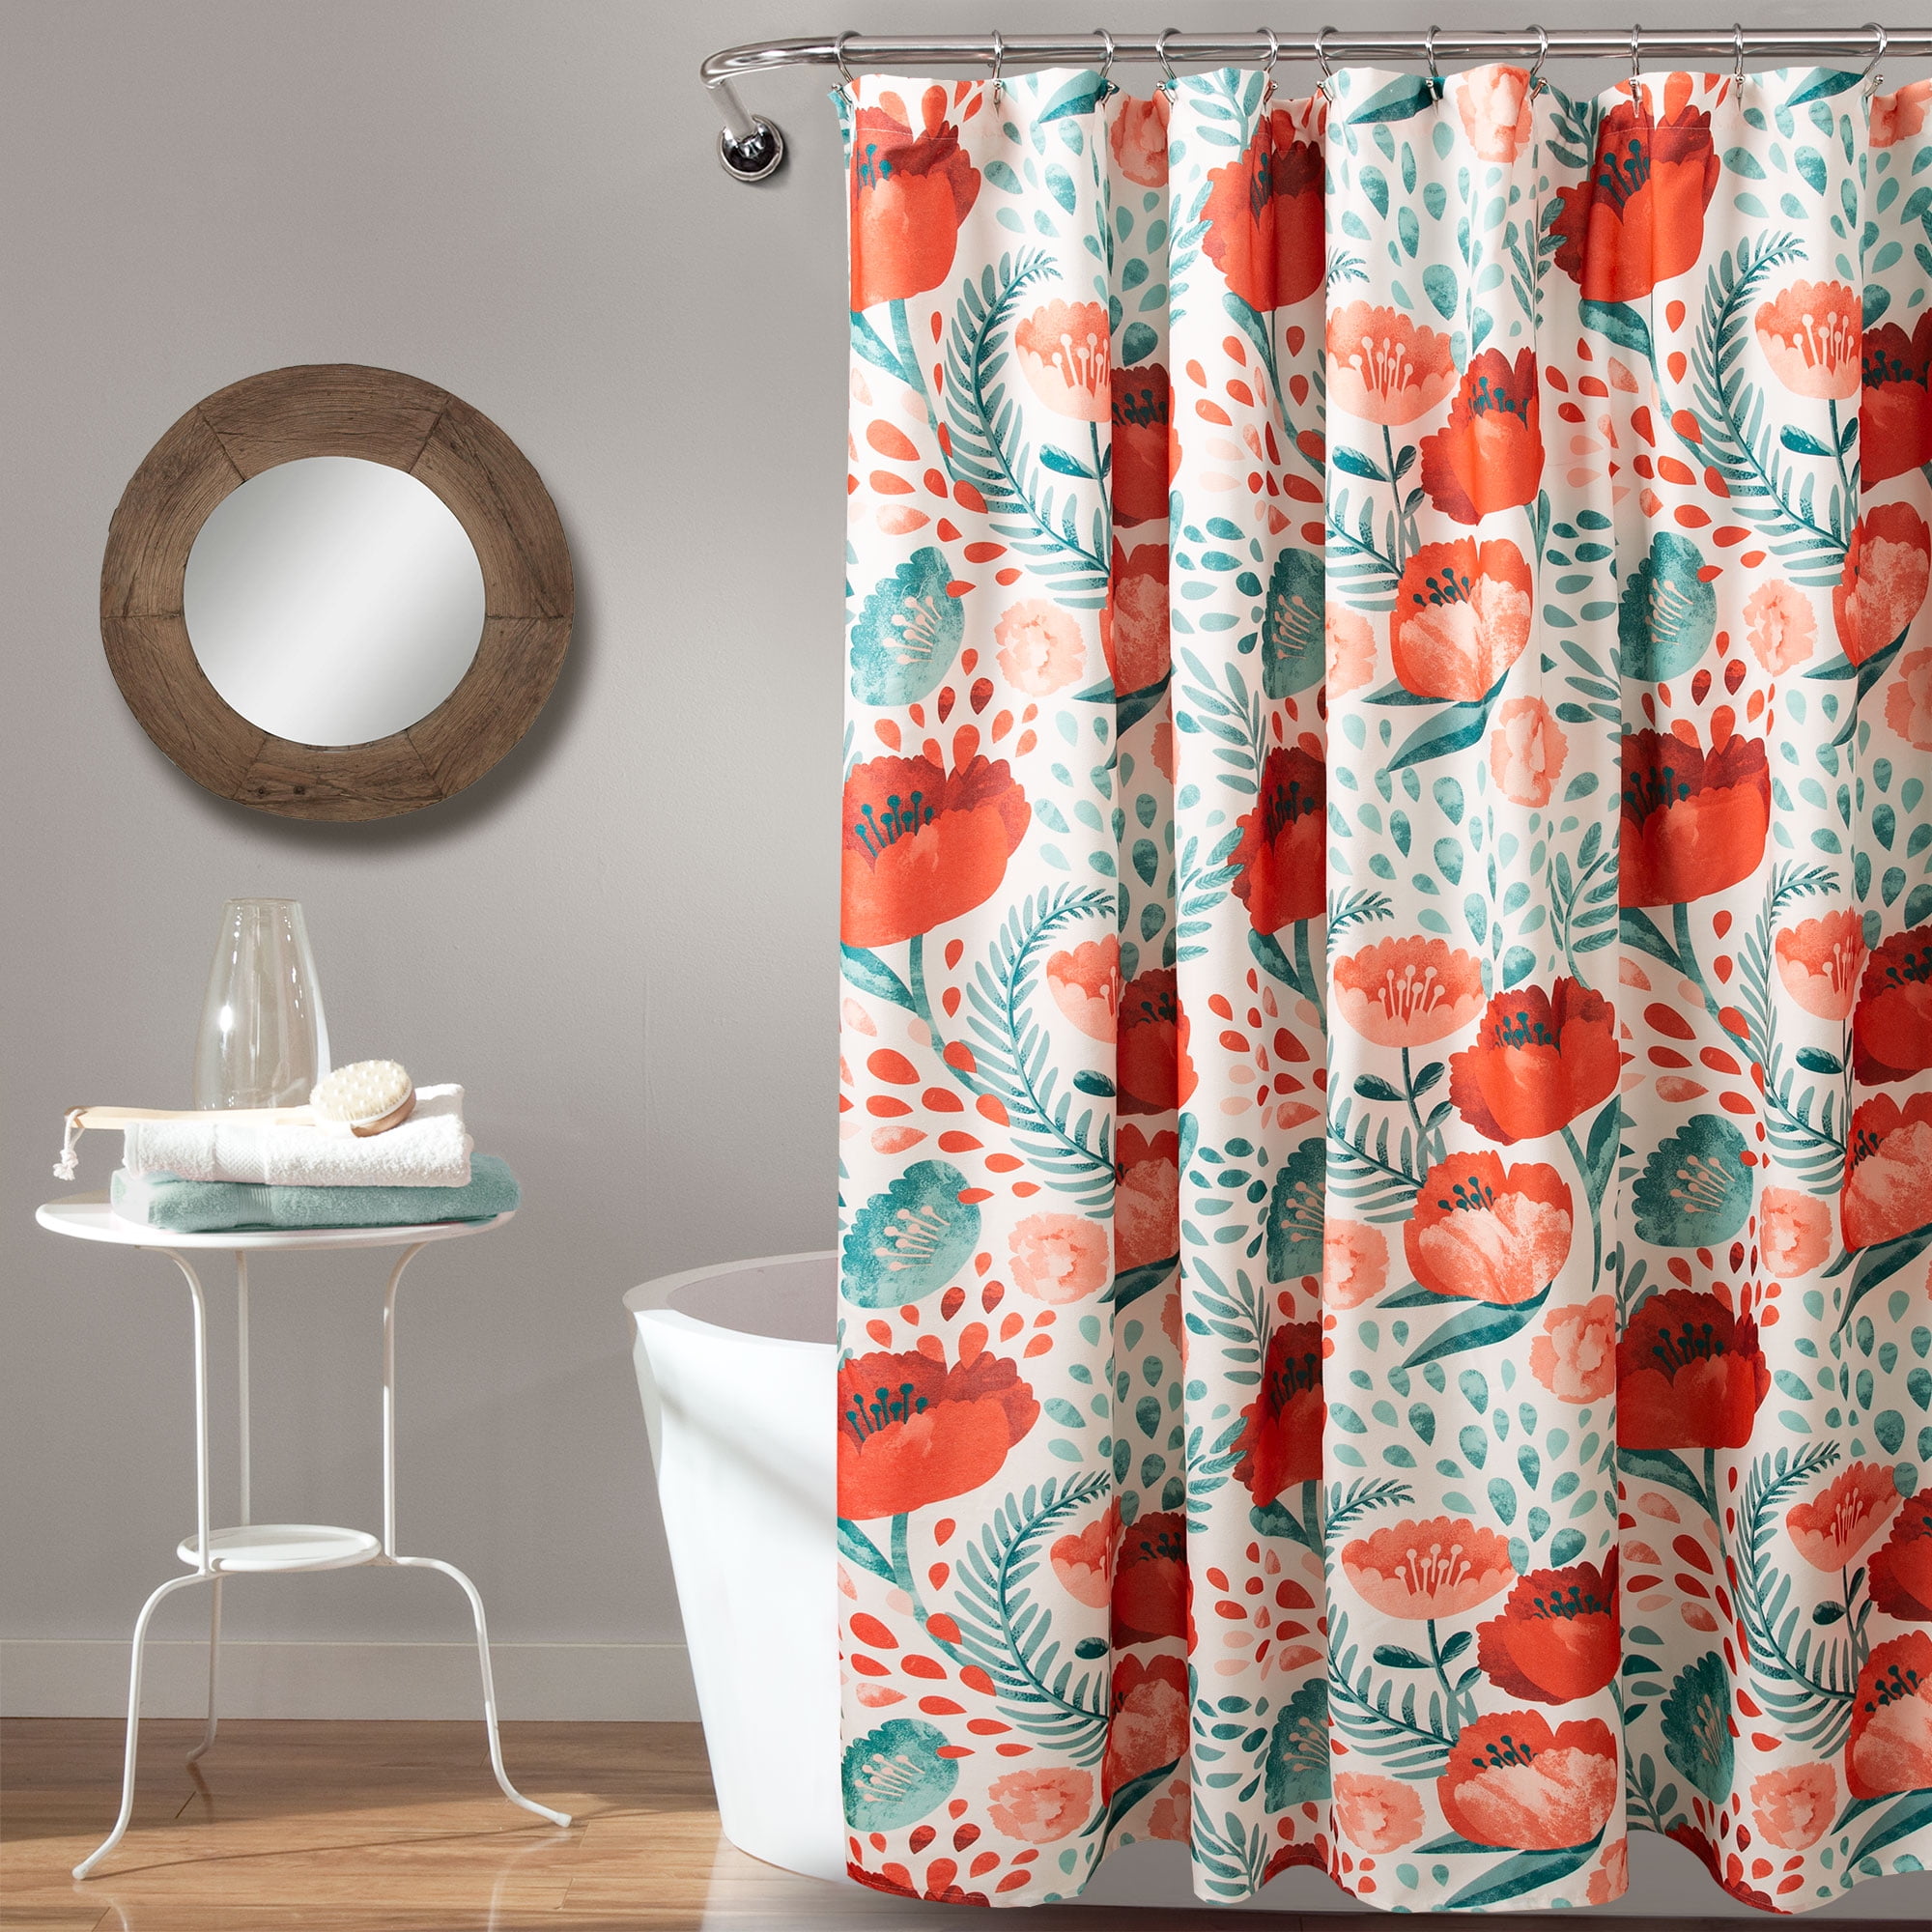 Details about   Starfish Coral Watercolor Painting Fabric Shower Curtain Set Bathroom Decor 72"